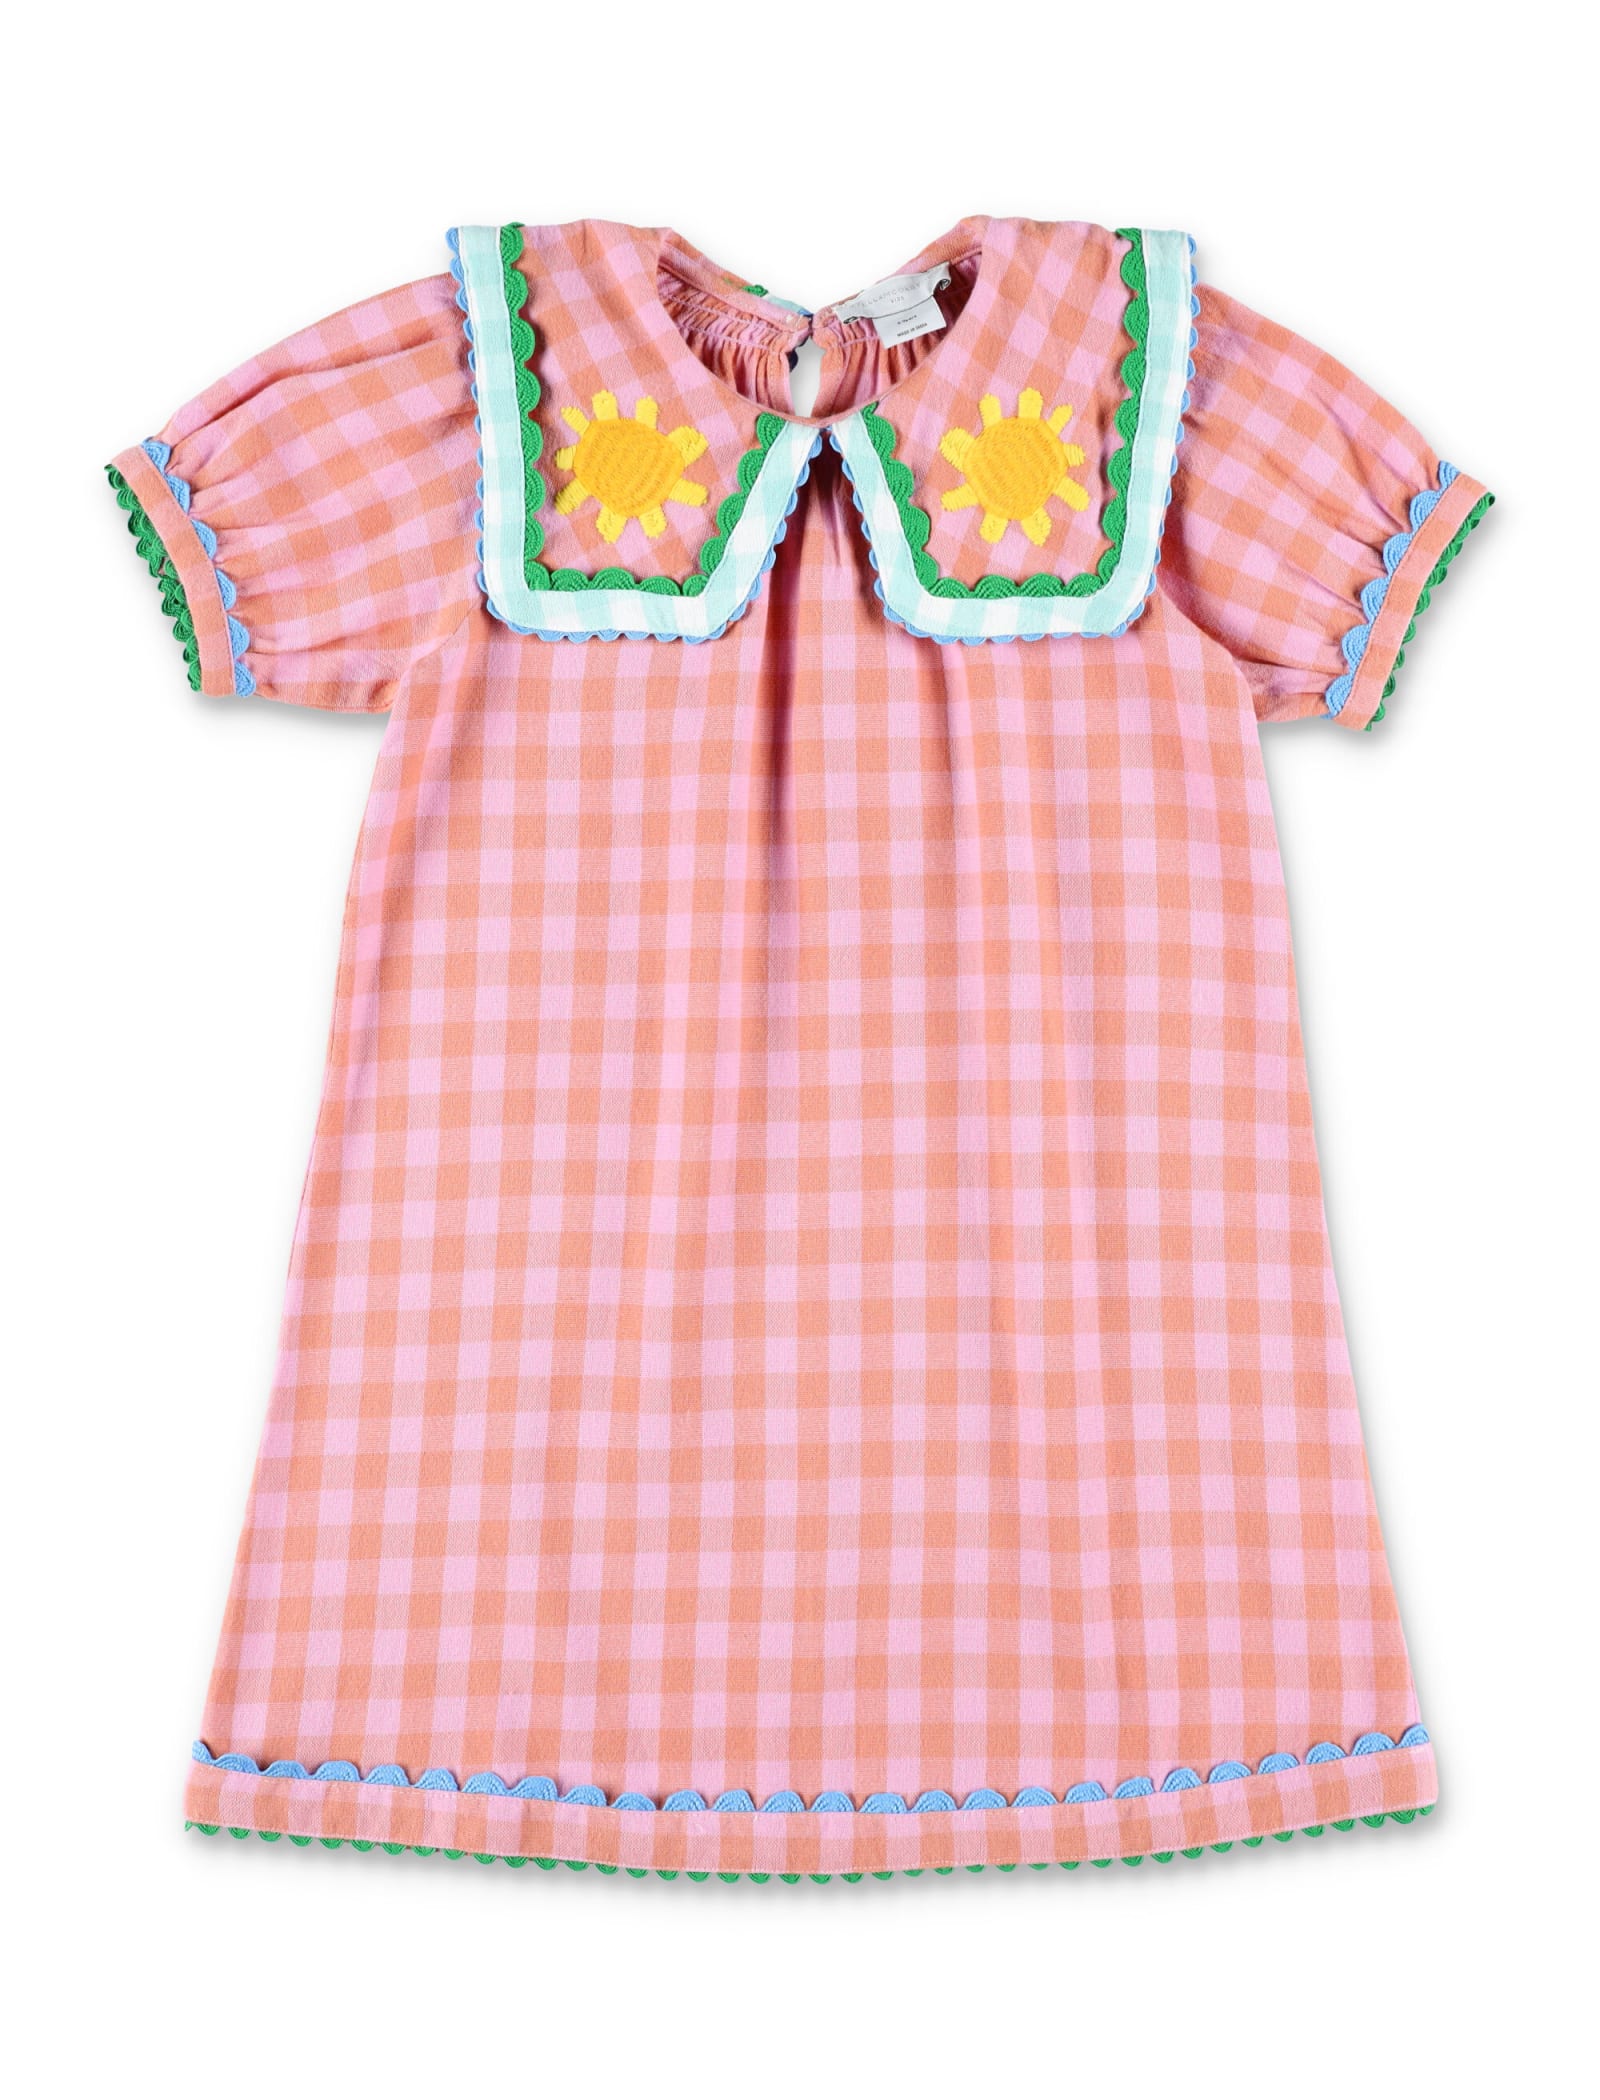 STELLA MCCARTNEY CHECK DRESS WITH EMBROIDERIES